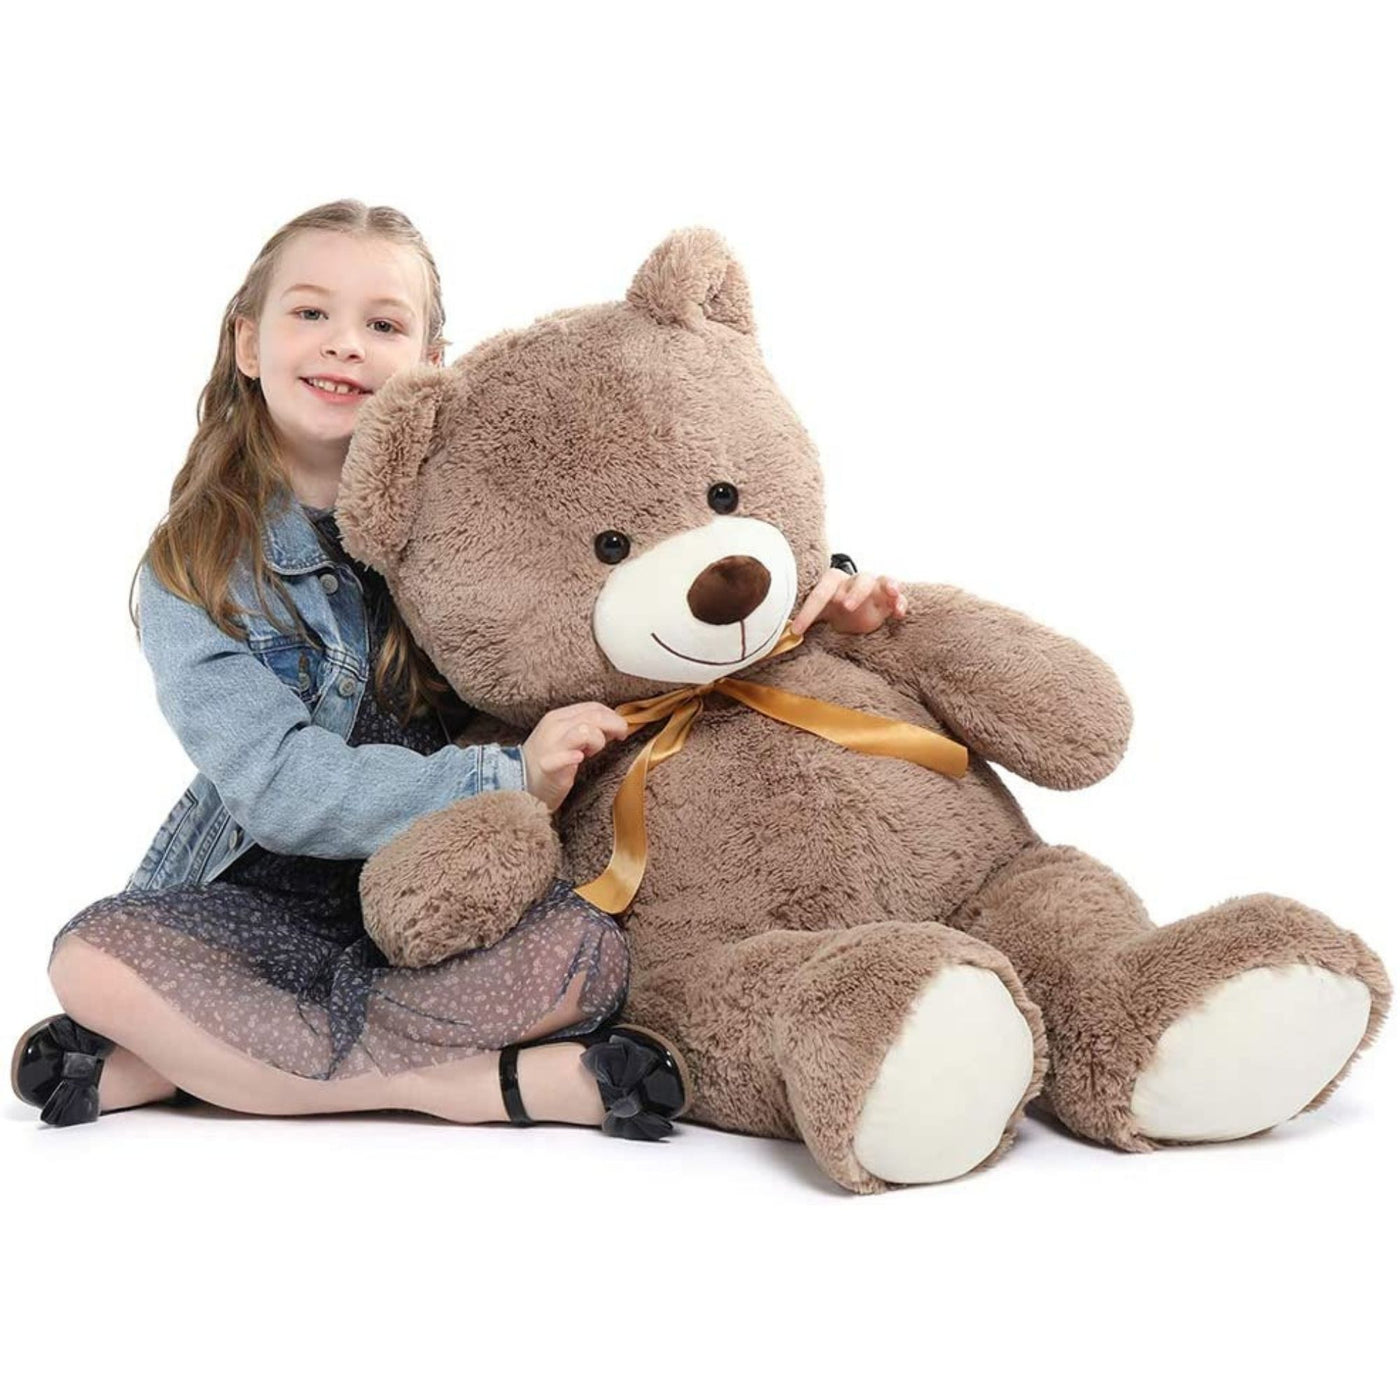 Giant Teddy Bear Stuffed Animal Toy, Brown, 40 Inches